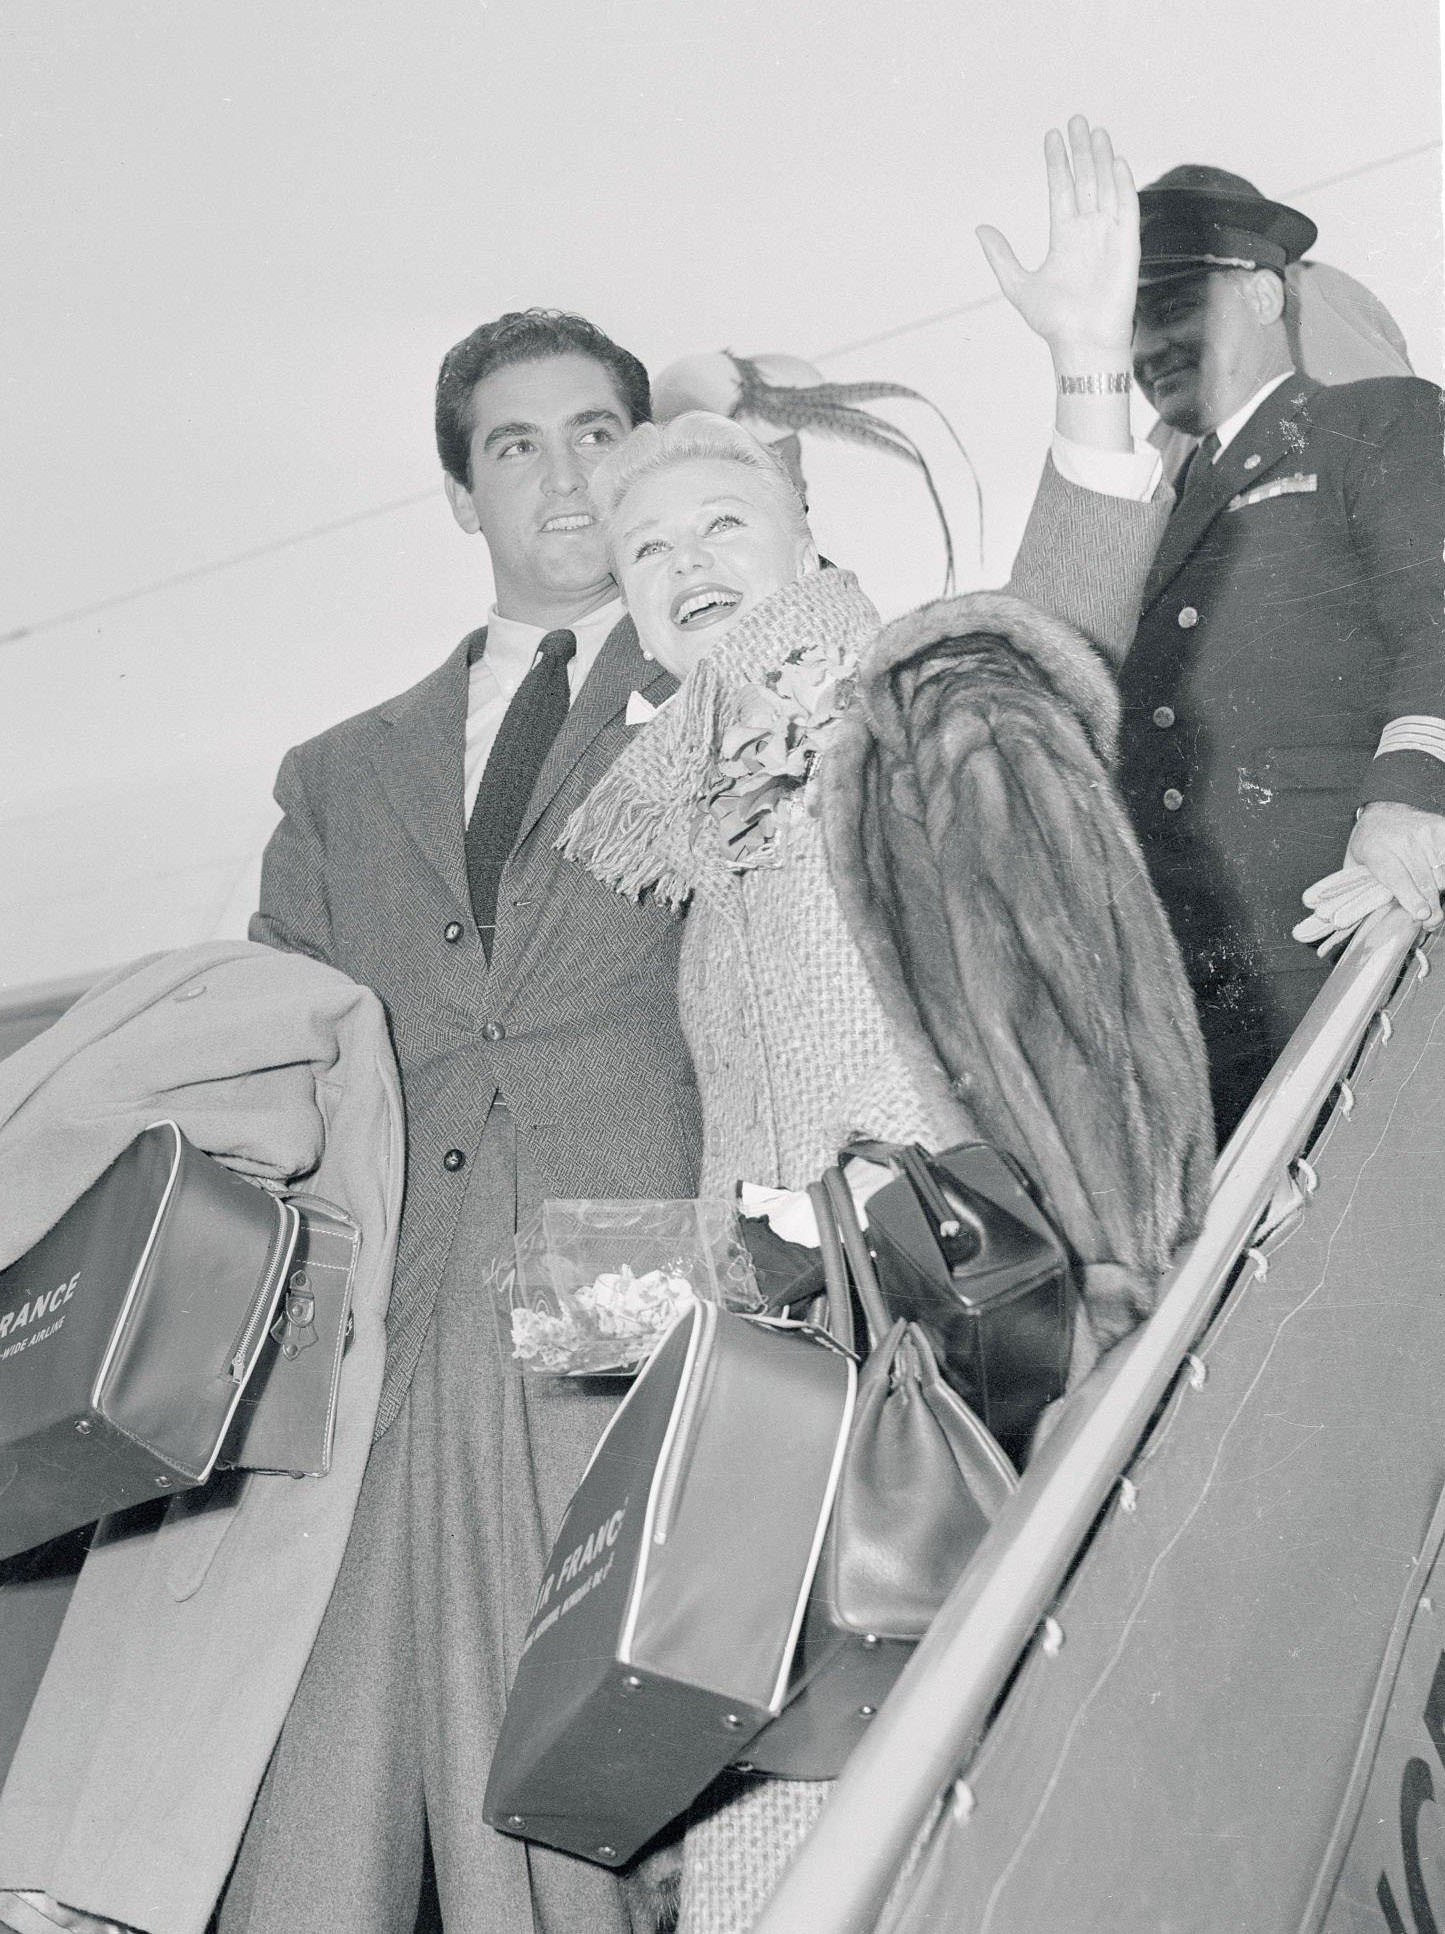 Ginger Rogers, a famous screen actress, and her husband, French actor Jacques Bergerac, arrive at ParisOrly airport after flying from the United States.